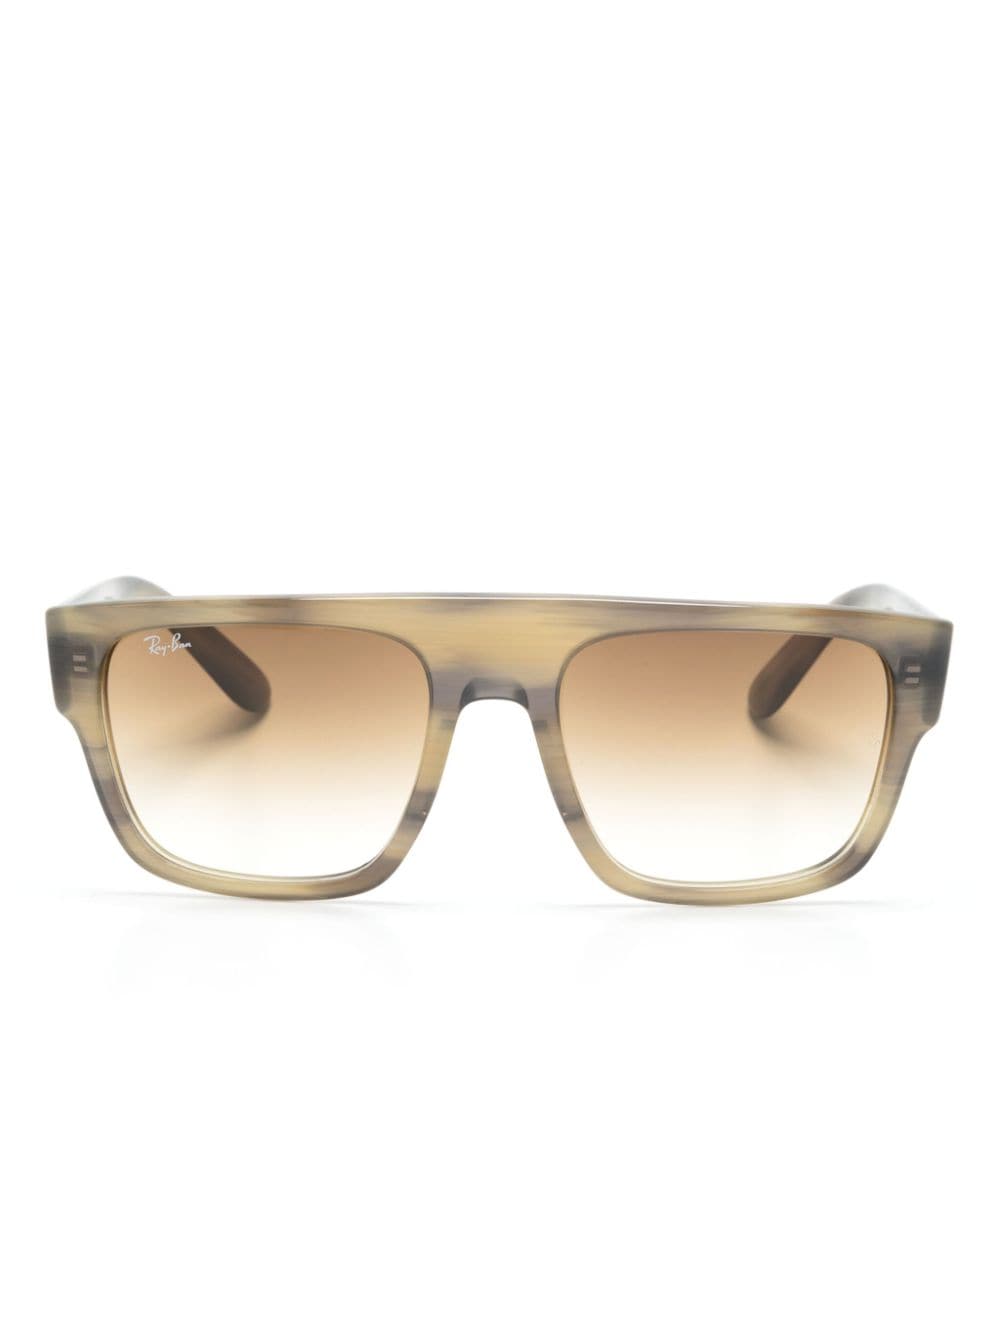 Ray Ban Drifter Square-frame Sunglasses In Green